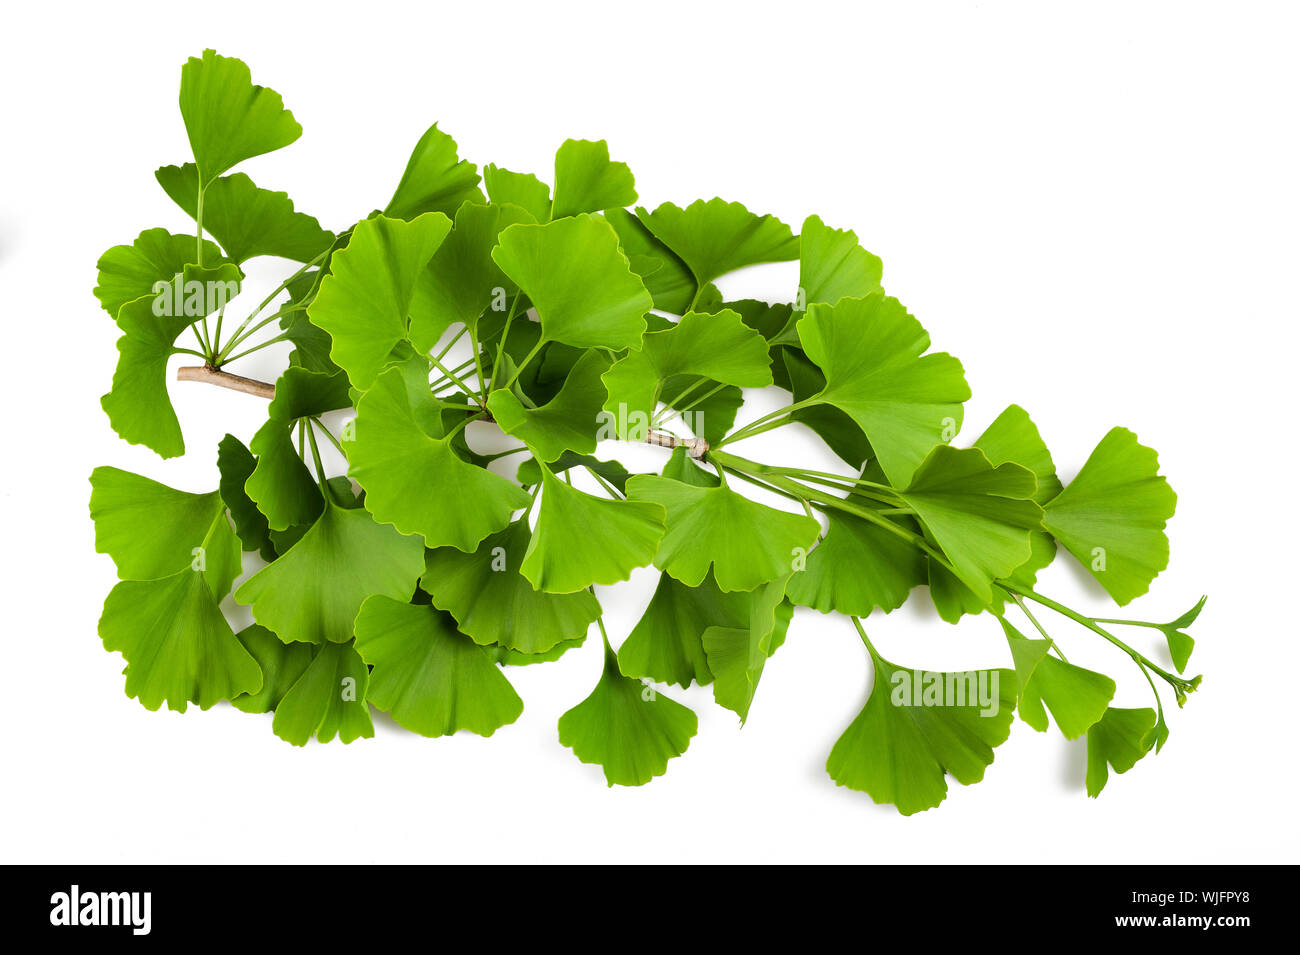 Ginkgo biloba branch with leaves isolated on white Stock Photo